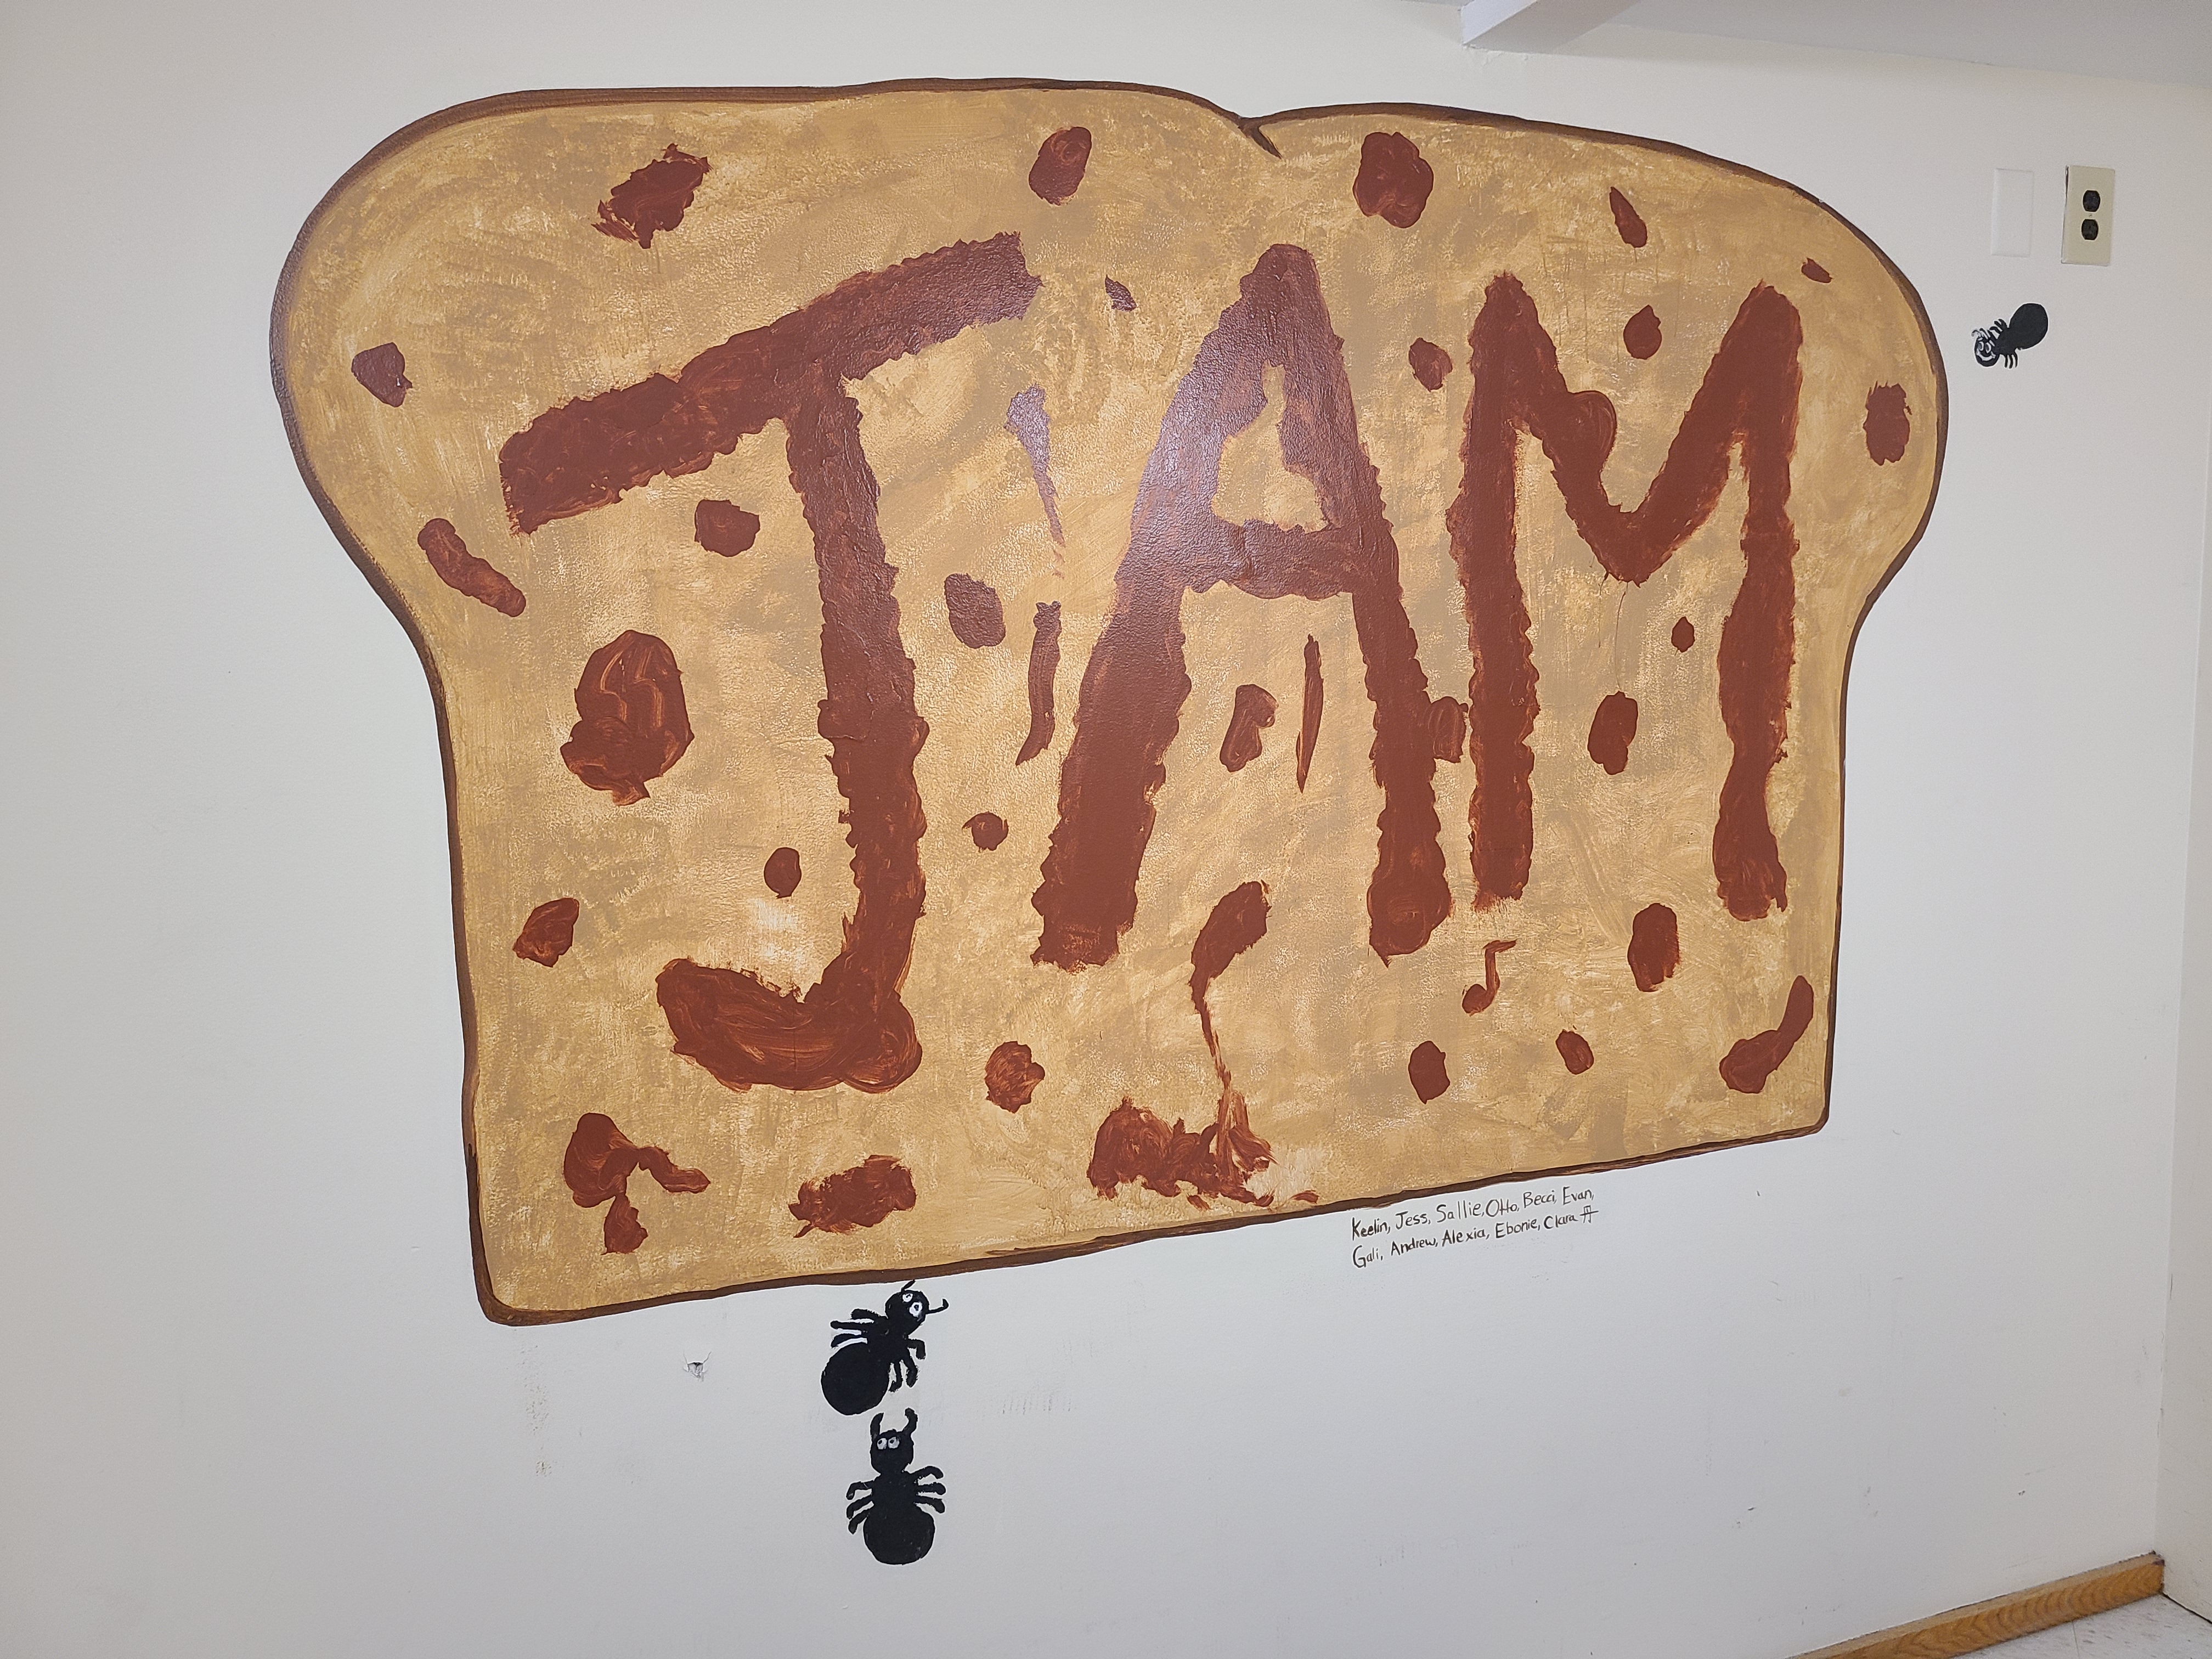 Photo of a piece of toast painted on a wall with "JAM" written on it